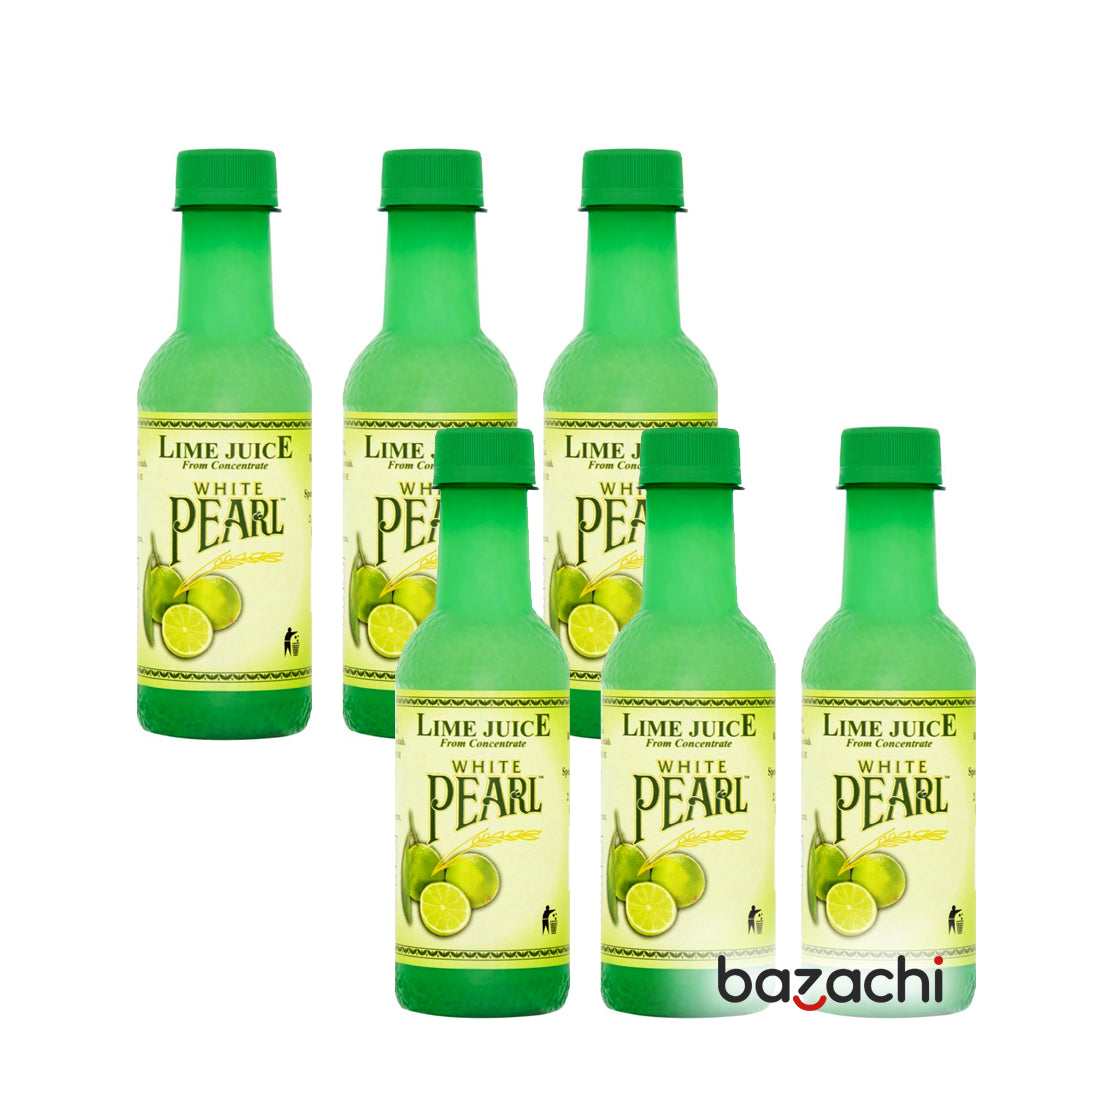 White Pearl Lime Juice from Concentrate 250ml